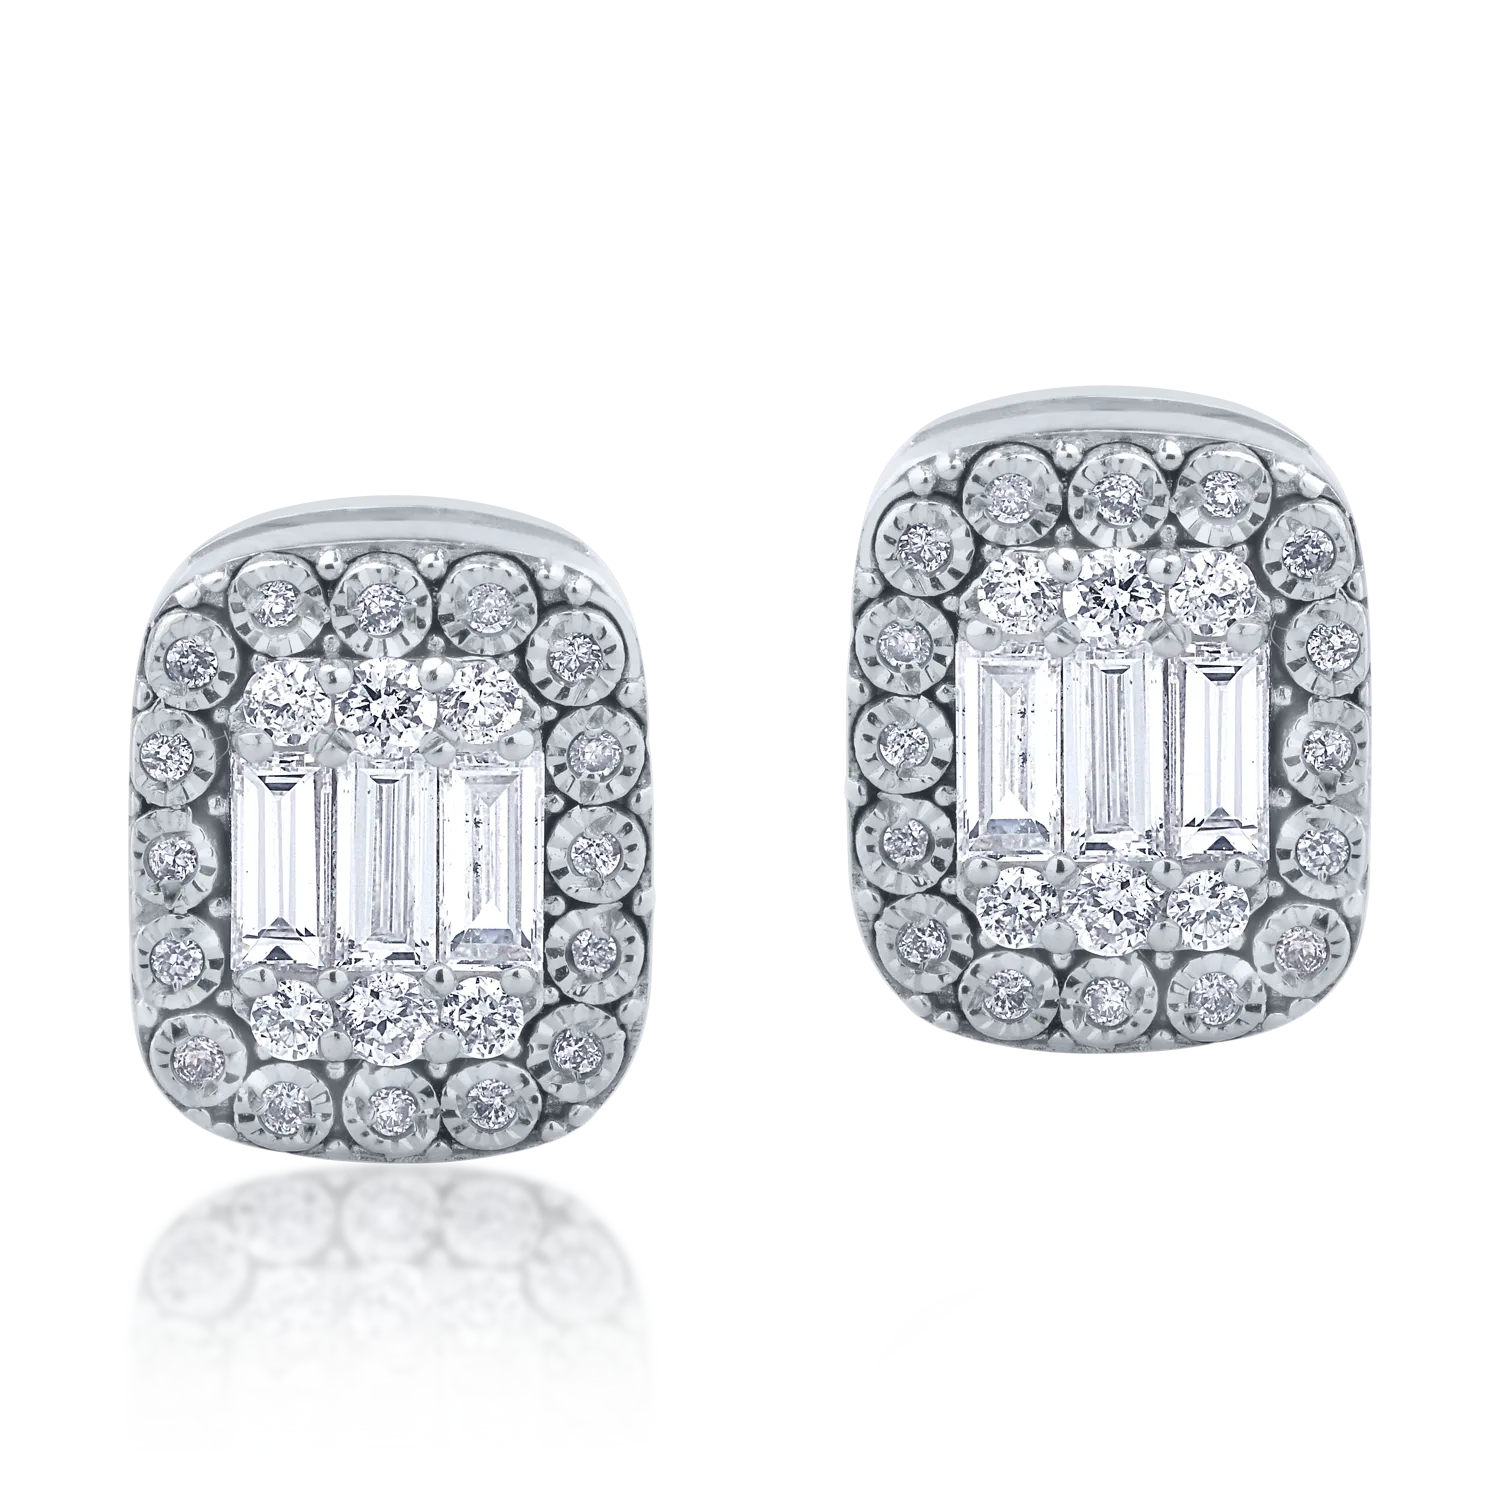 18K white gold earrings with 0.58ct diamonds